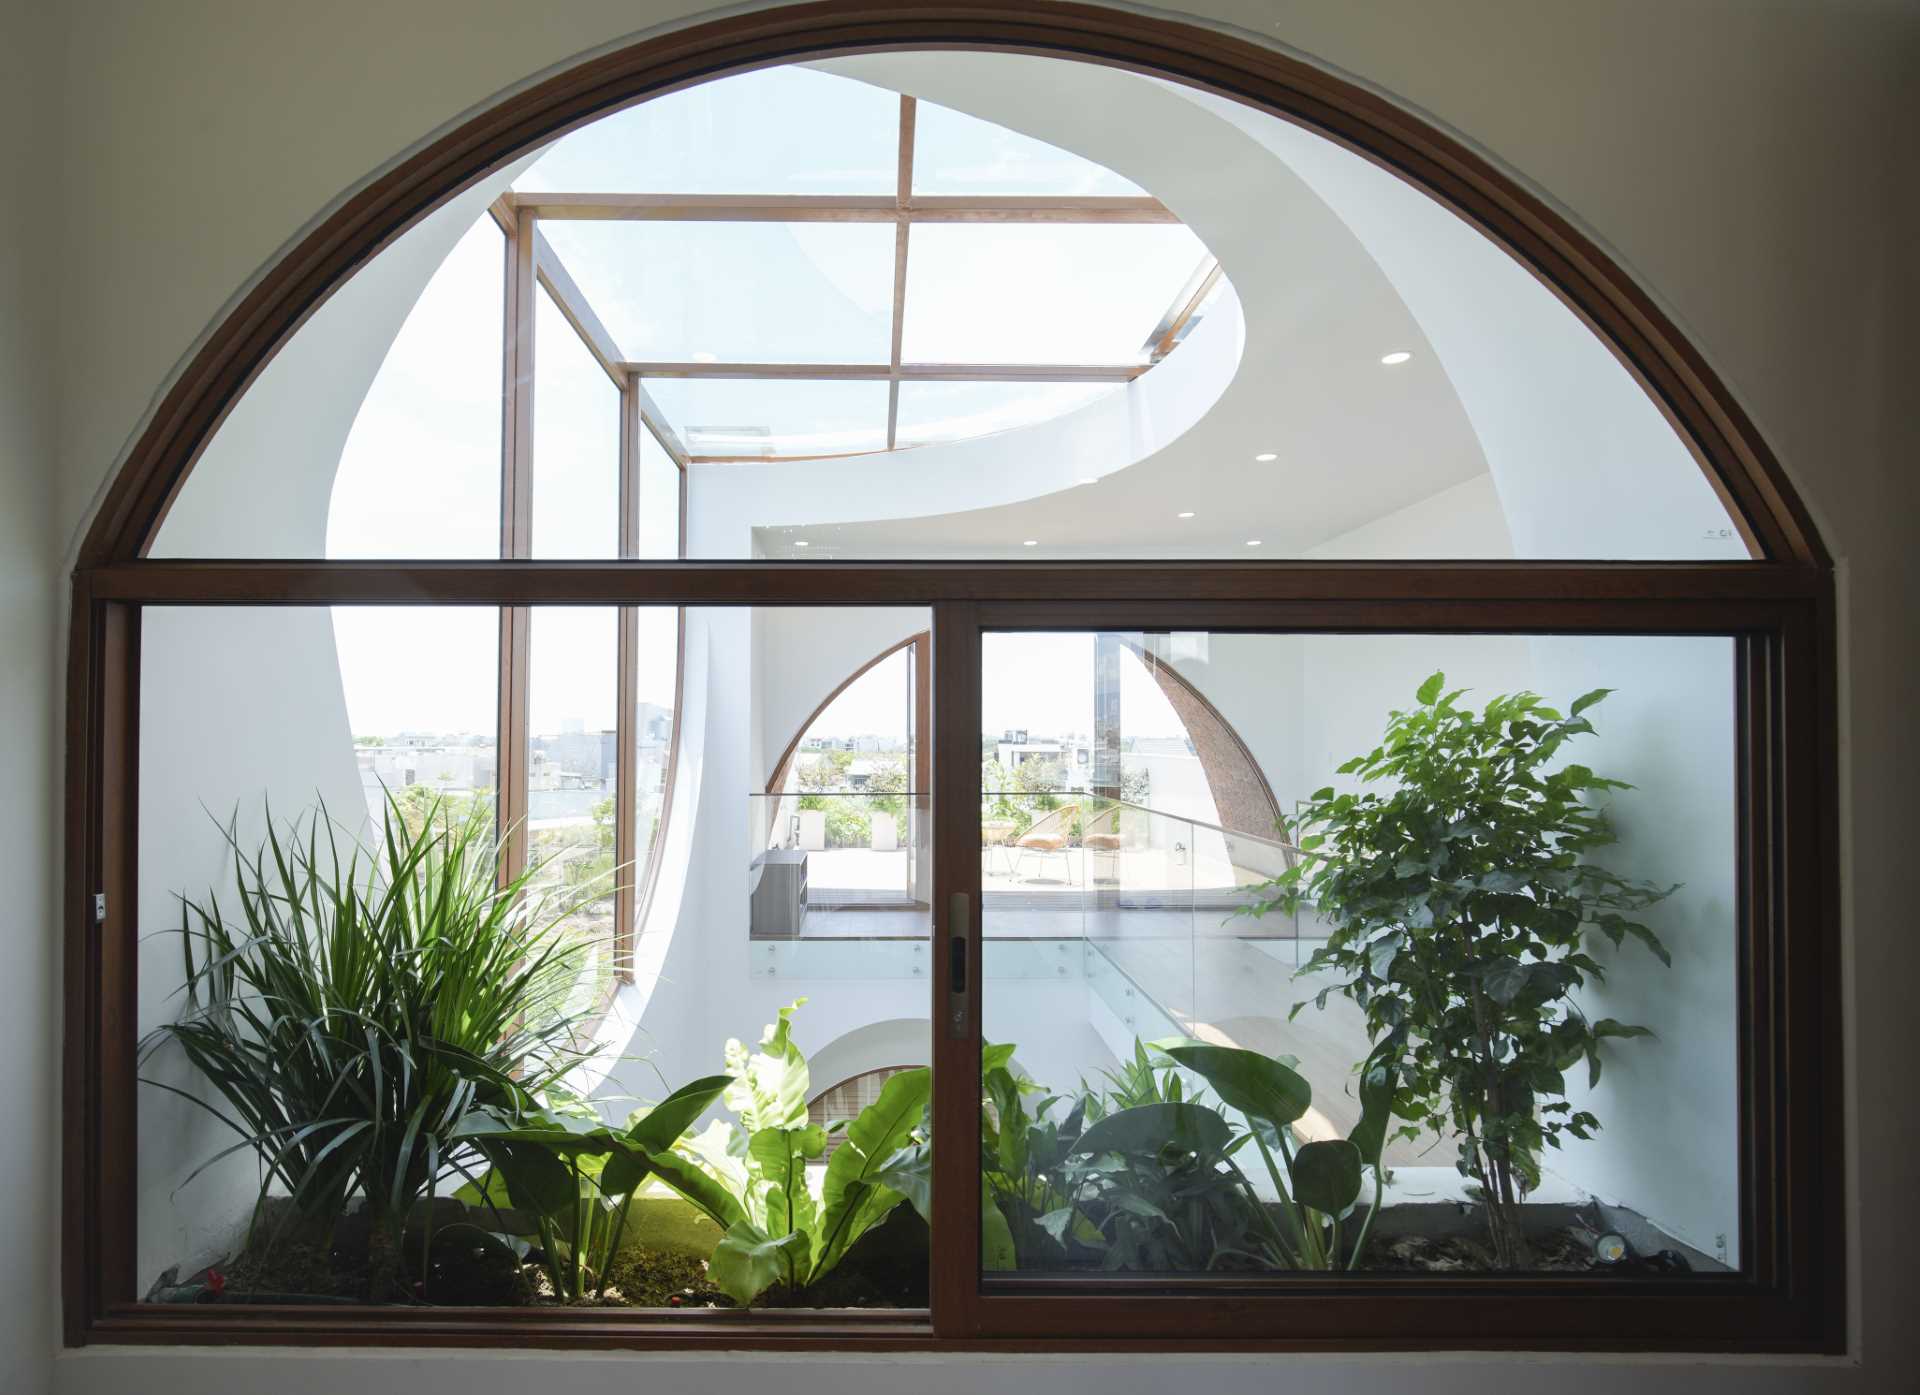 A modern house with an arched window and built-in planter.